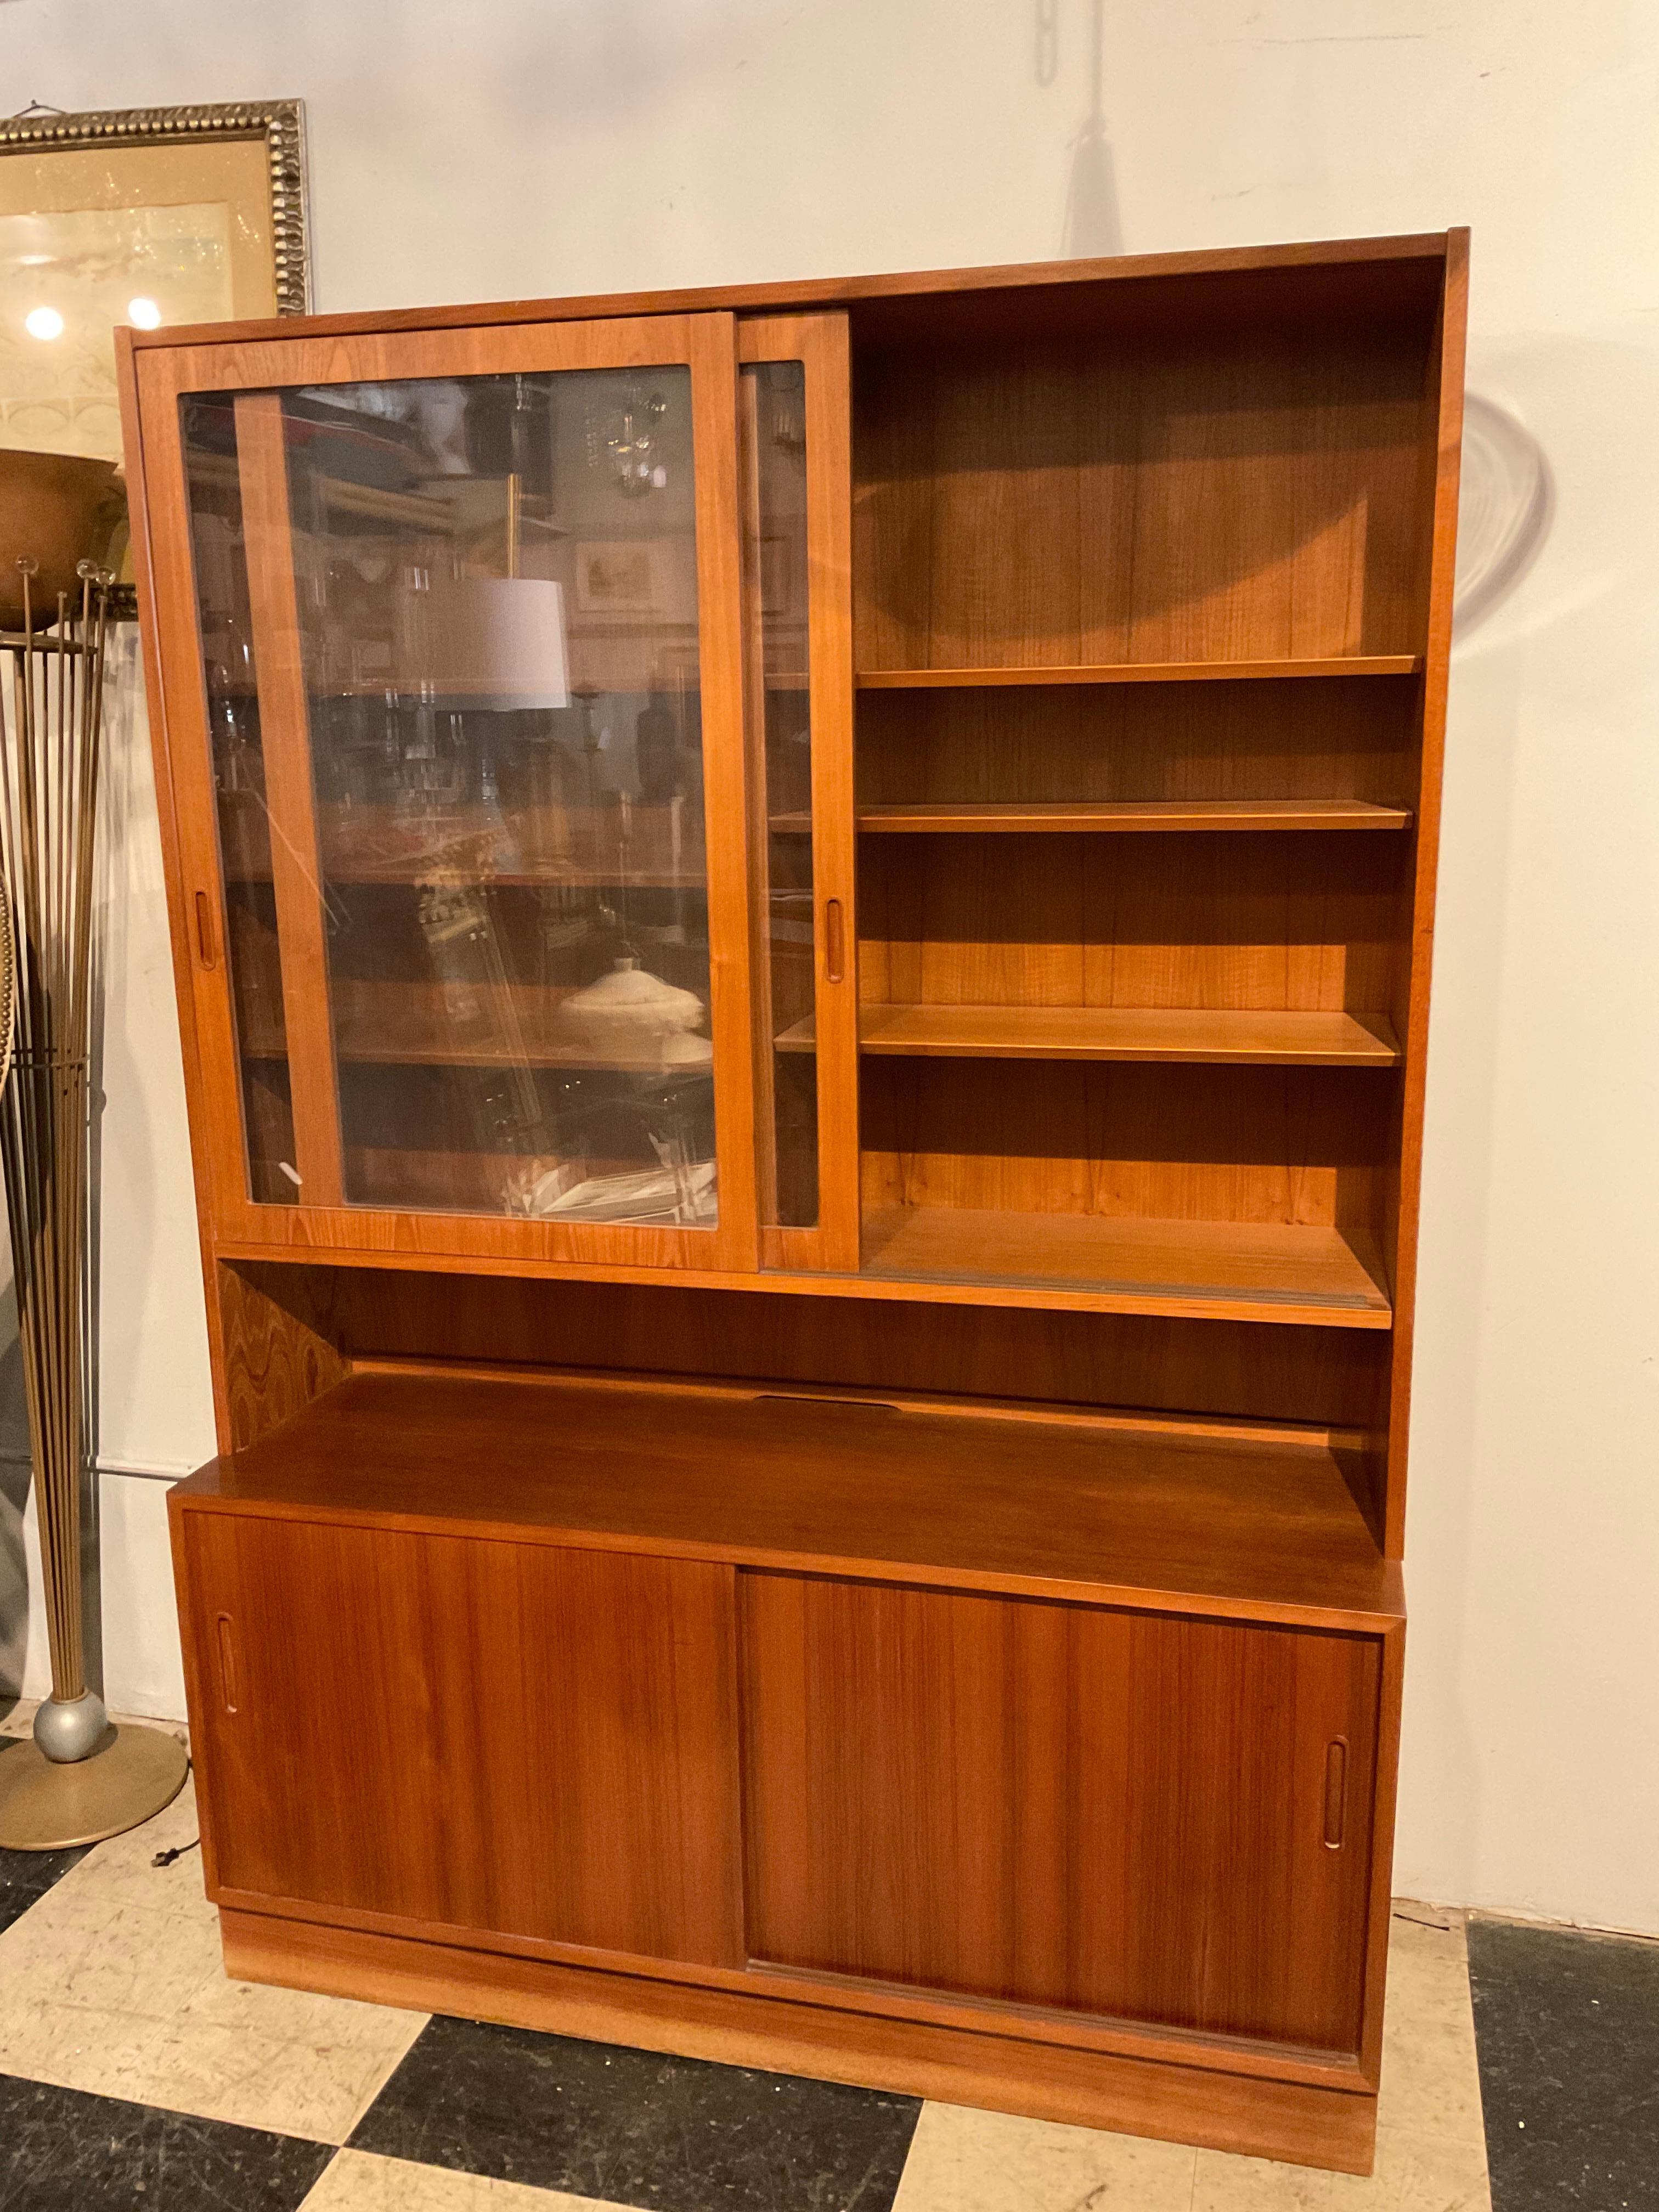 Late 20th Century 1970s Poul Hundevad Teak Glass Door Bookcase / China Cabinet Made In Denmark For Sale